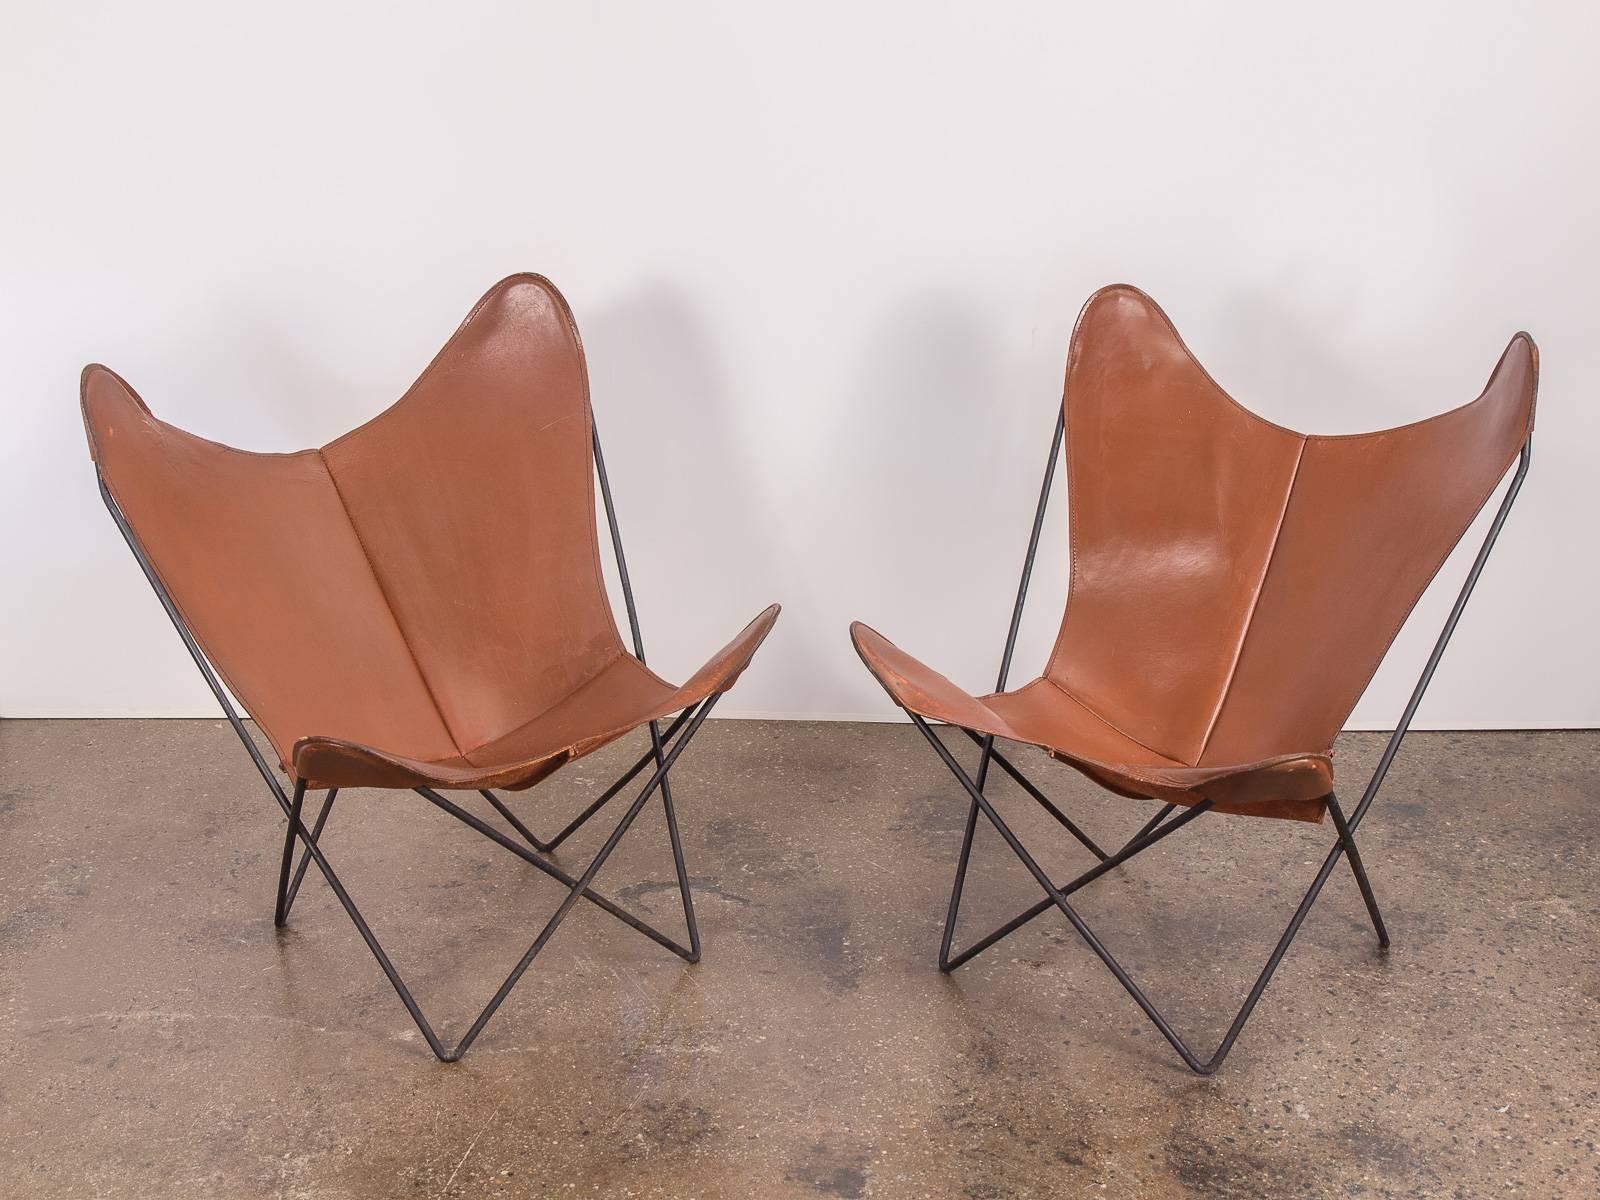 Pair of vintage Hardoy Butterfly BKF chairs for Knoll. These examples are from the 1960s, and are very high quality, hand stitching is tight and the thick, tobacco brown leather has a gentle patina which will ripen handsomely with time. Varying